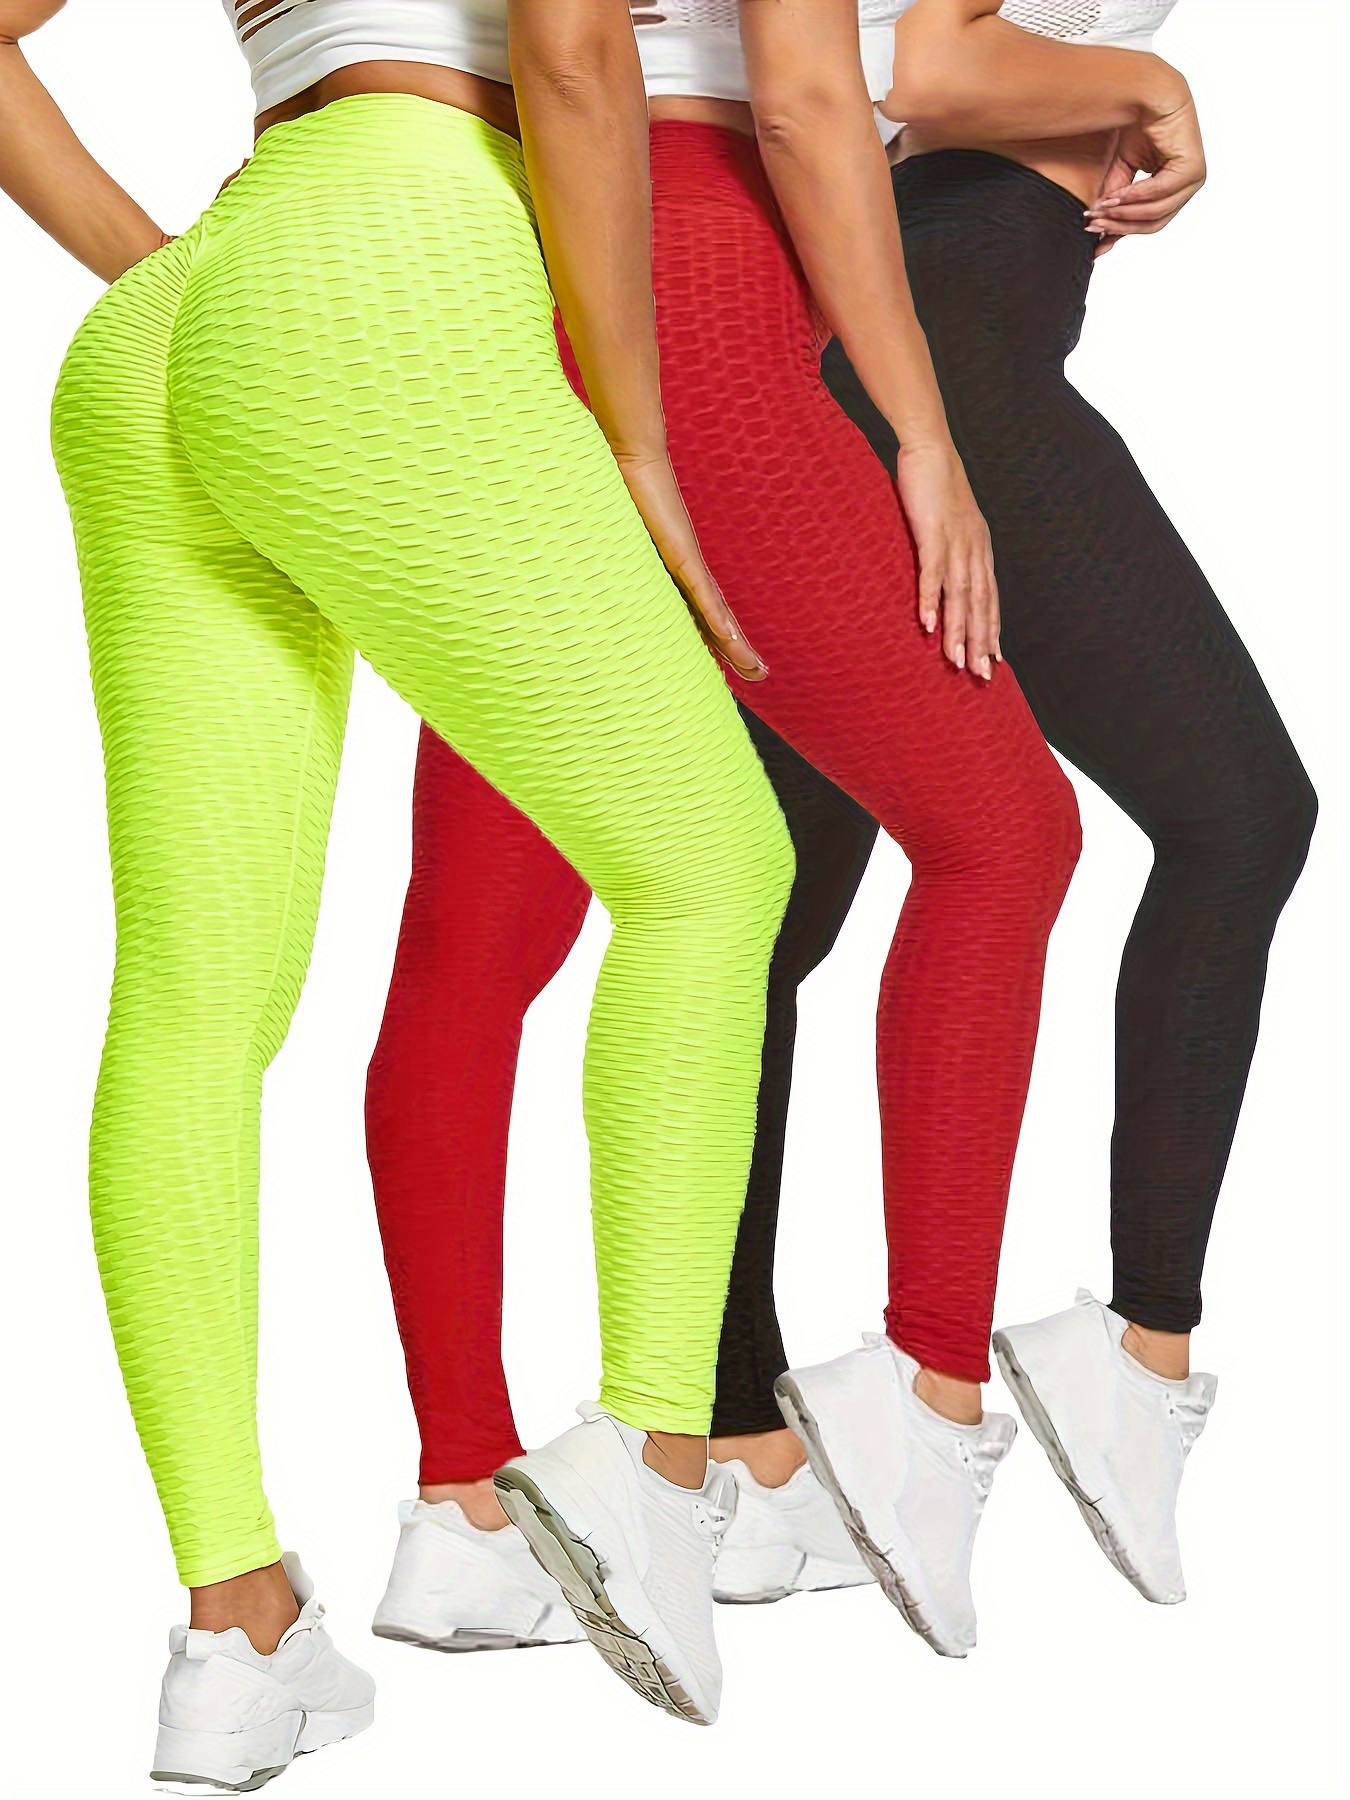 SMihono Women's Sports Fitness Pants Solid Colored CasualTight